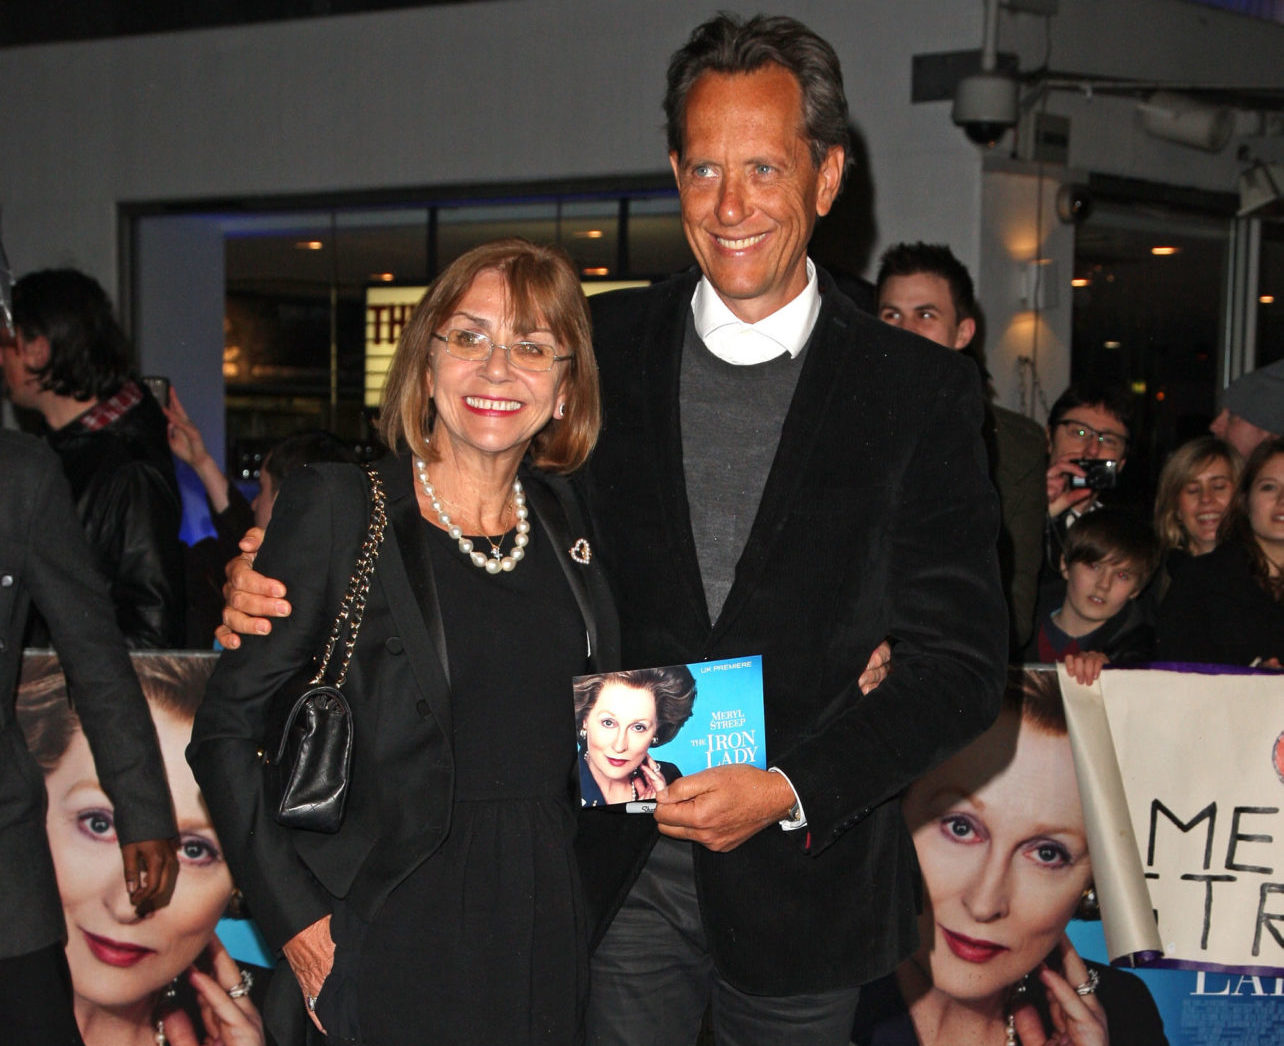 Richard E Grant and his wife Joan Washington arrive at the UK premiere of 'The Iron Lady'in London, England in January 2012.